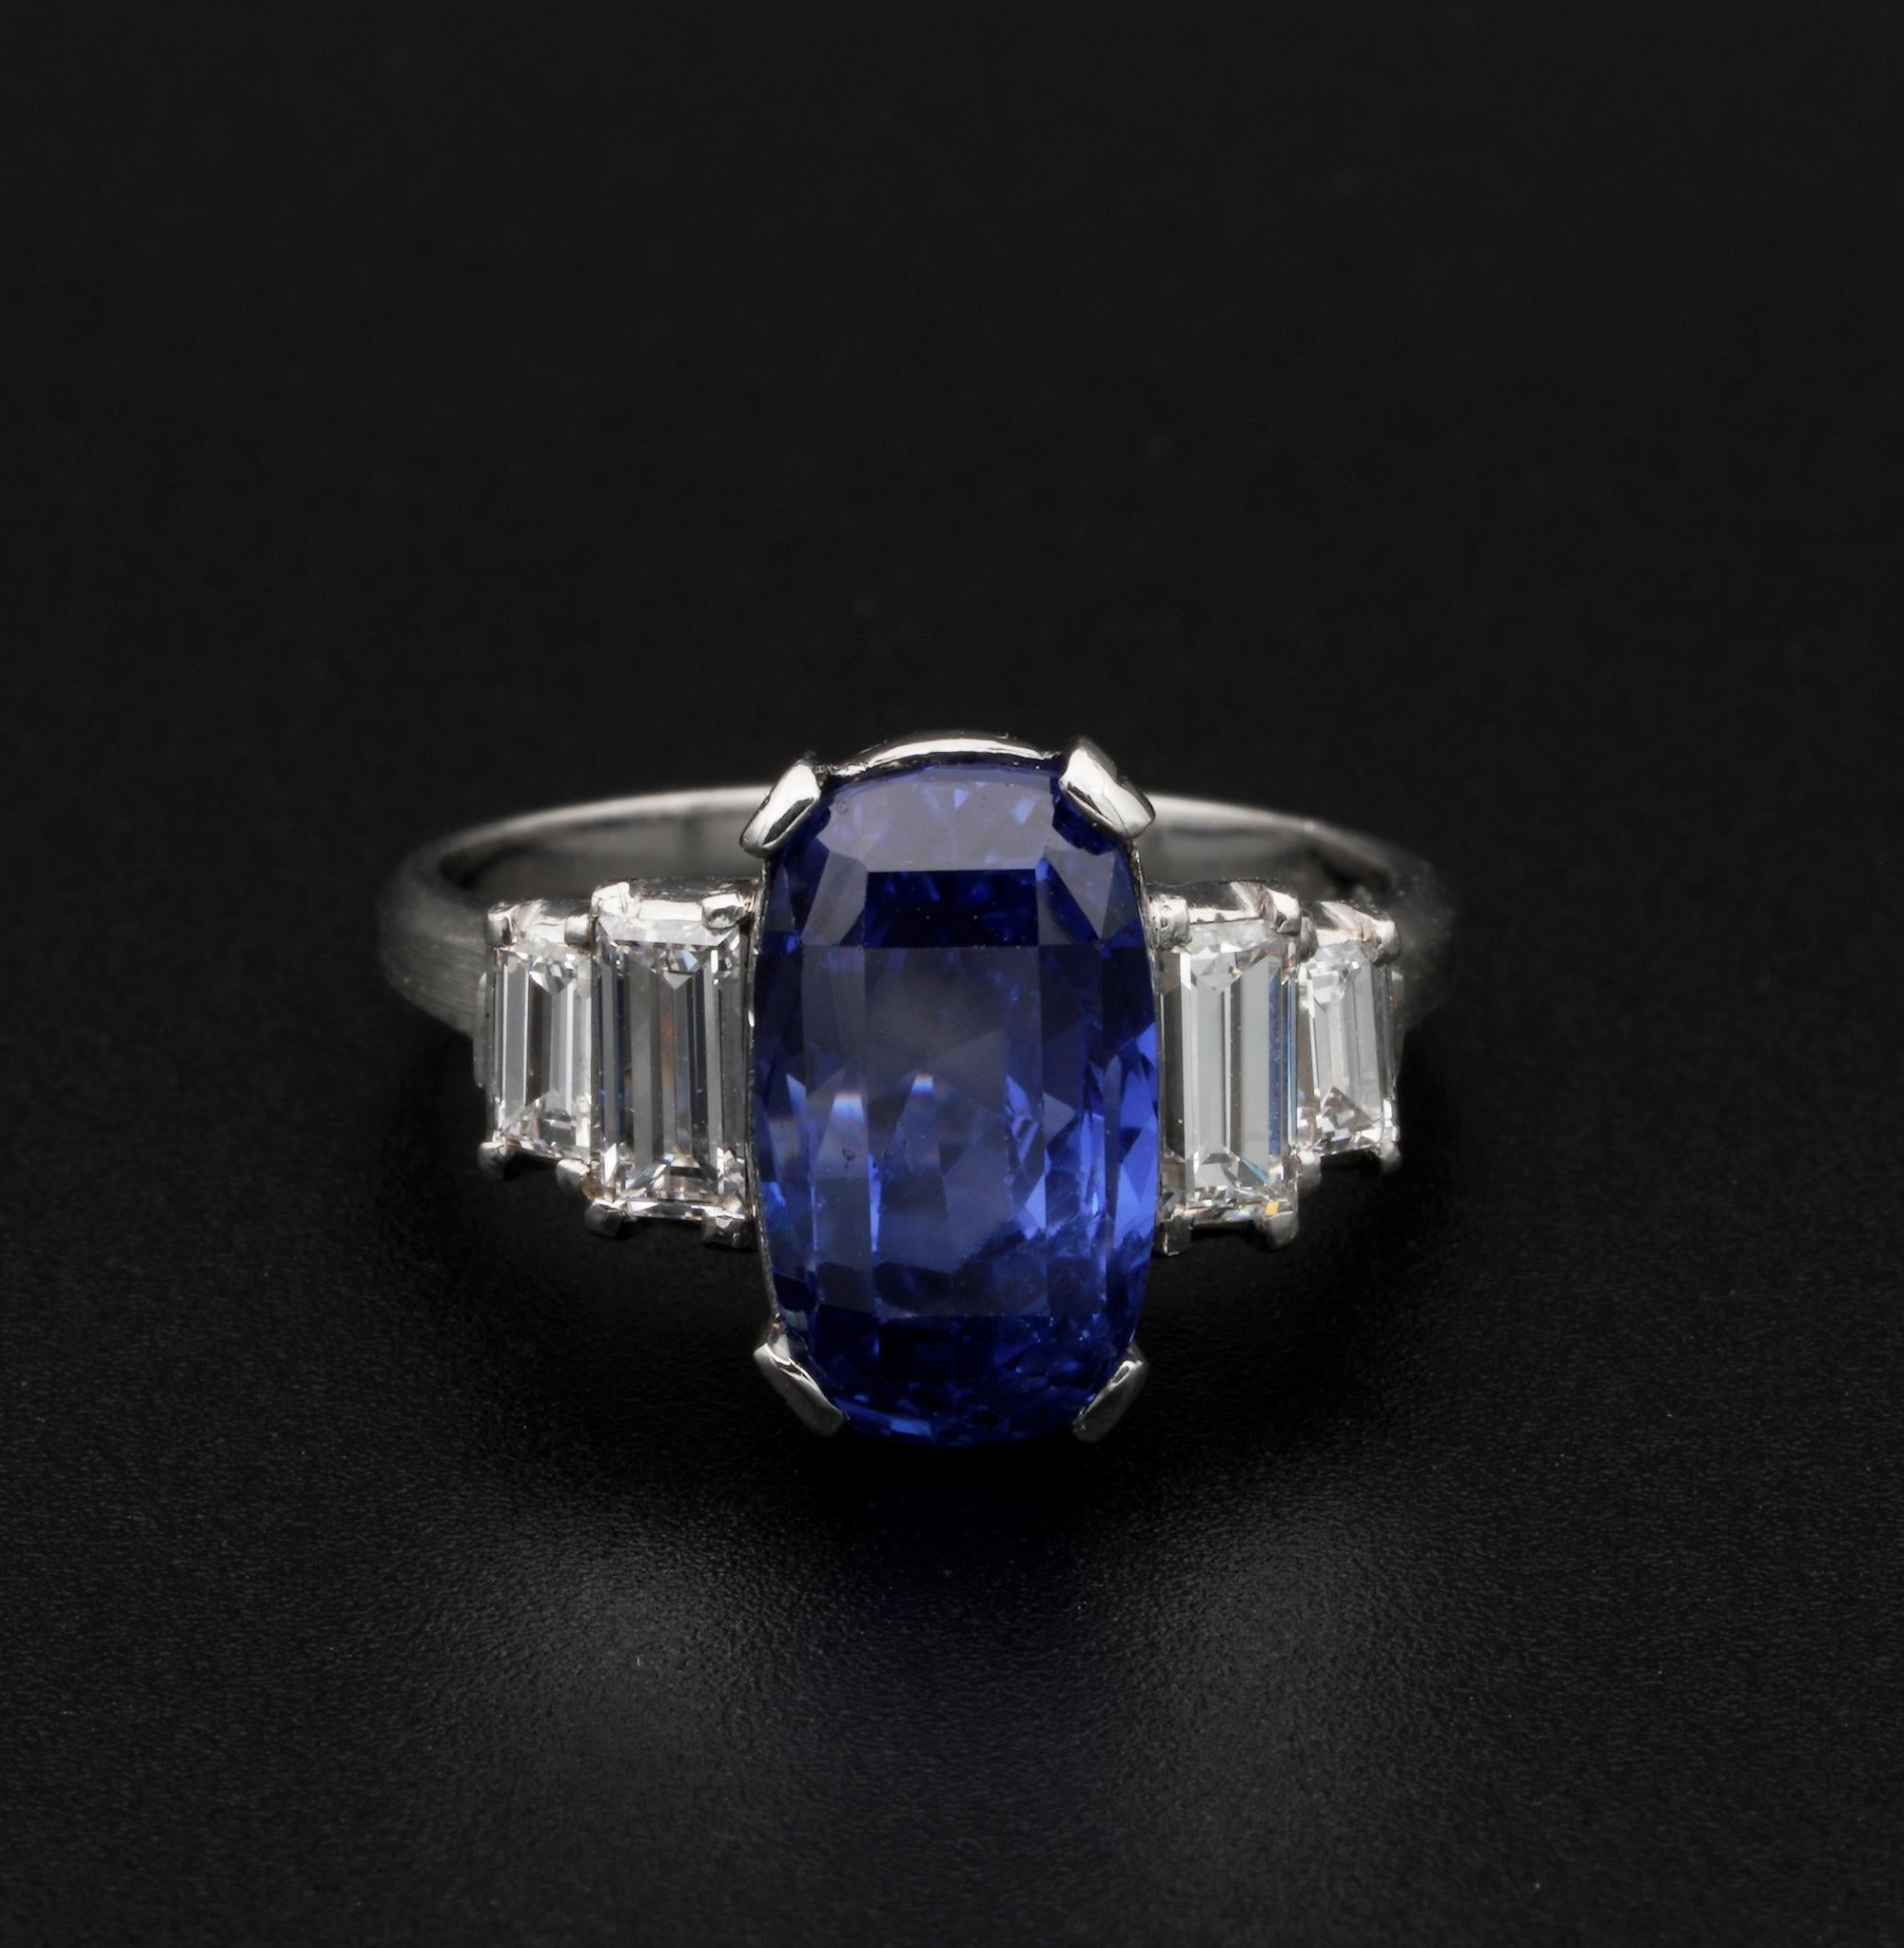 World’s Most Coveted Gemstone
For centuries, sapphire has been associated with royalty and romance. The association was reinforced in 1981, when Britain’s Prince Charles gave a blue sapphire engagement ring to Lady Diana Spencer
This magnificent Art